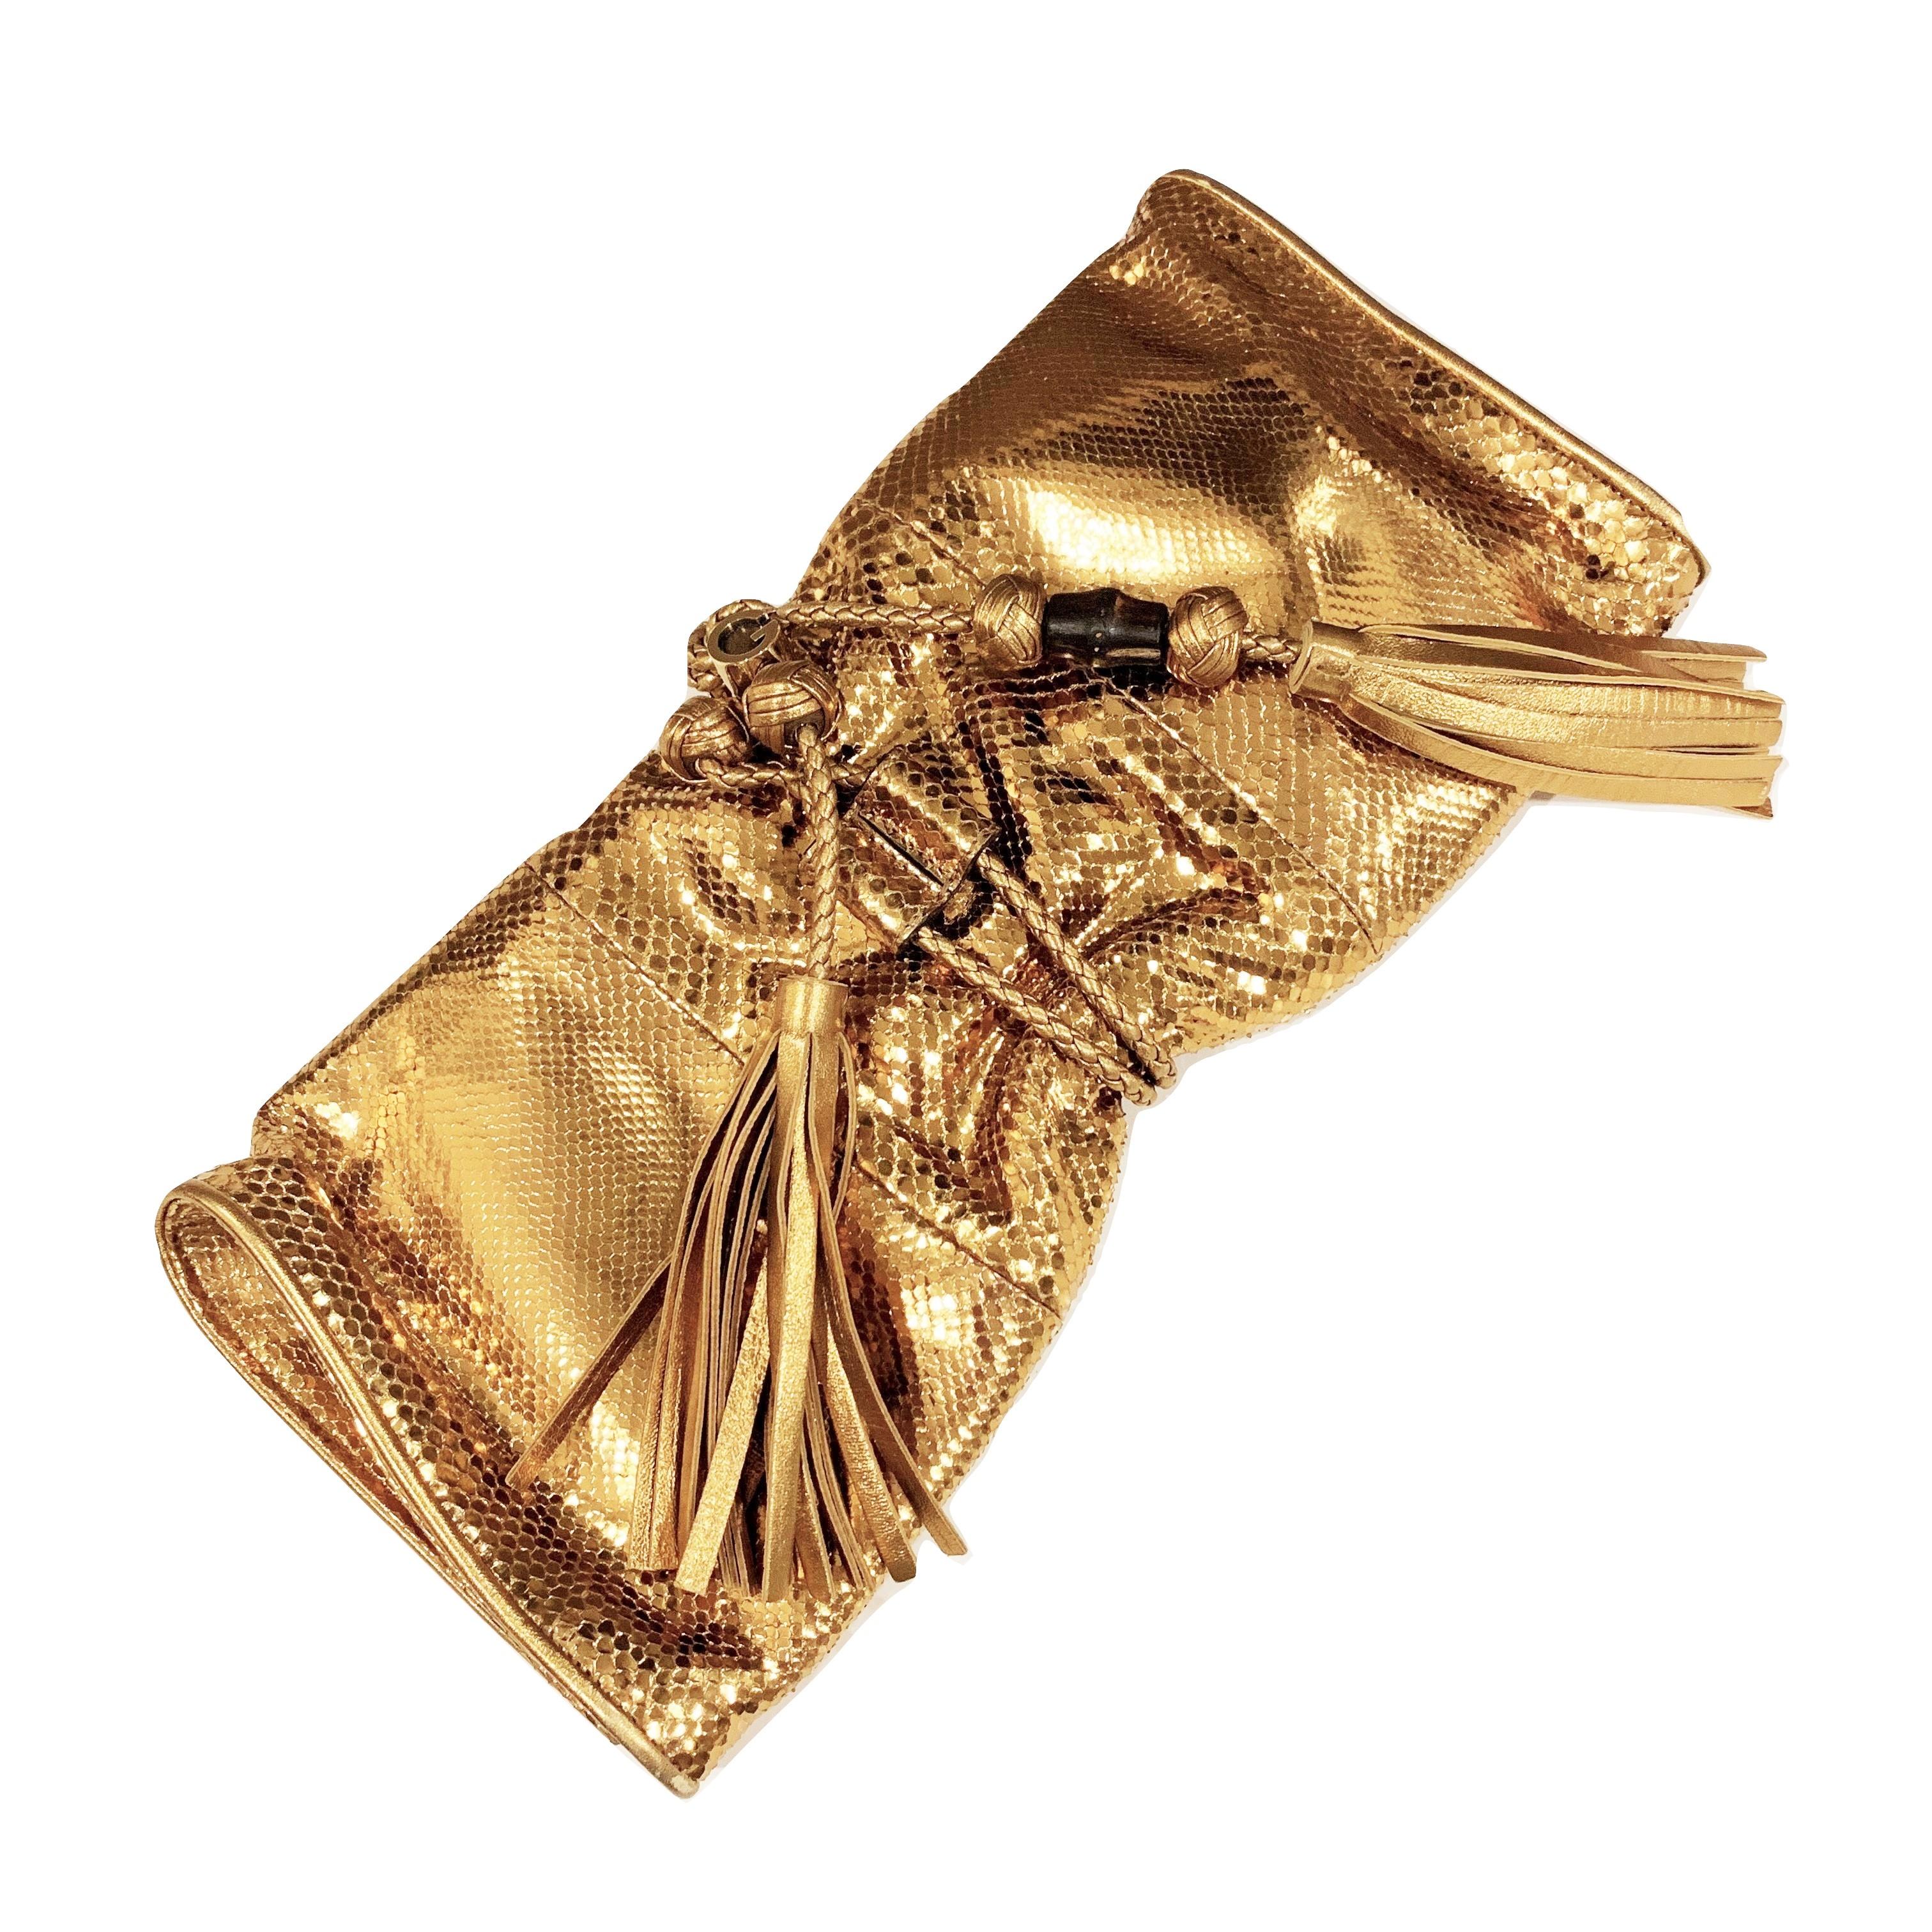 Brown New Gucci Malika Large Python Clutch Bag in Gold As Seen on J-Lo & Kim